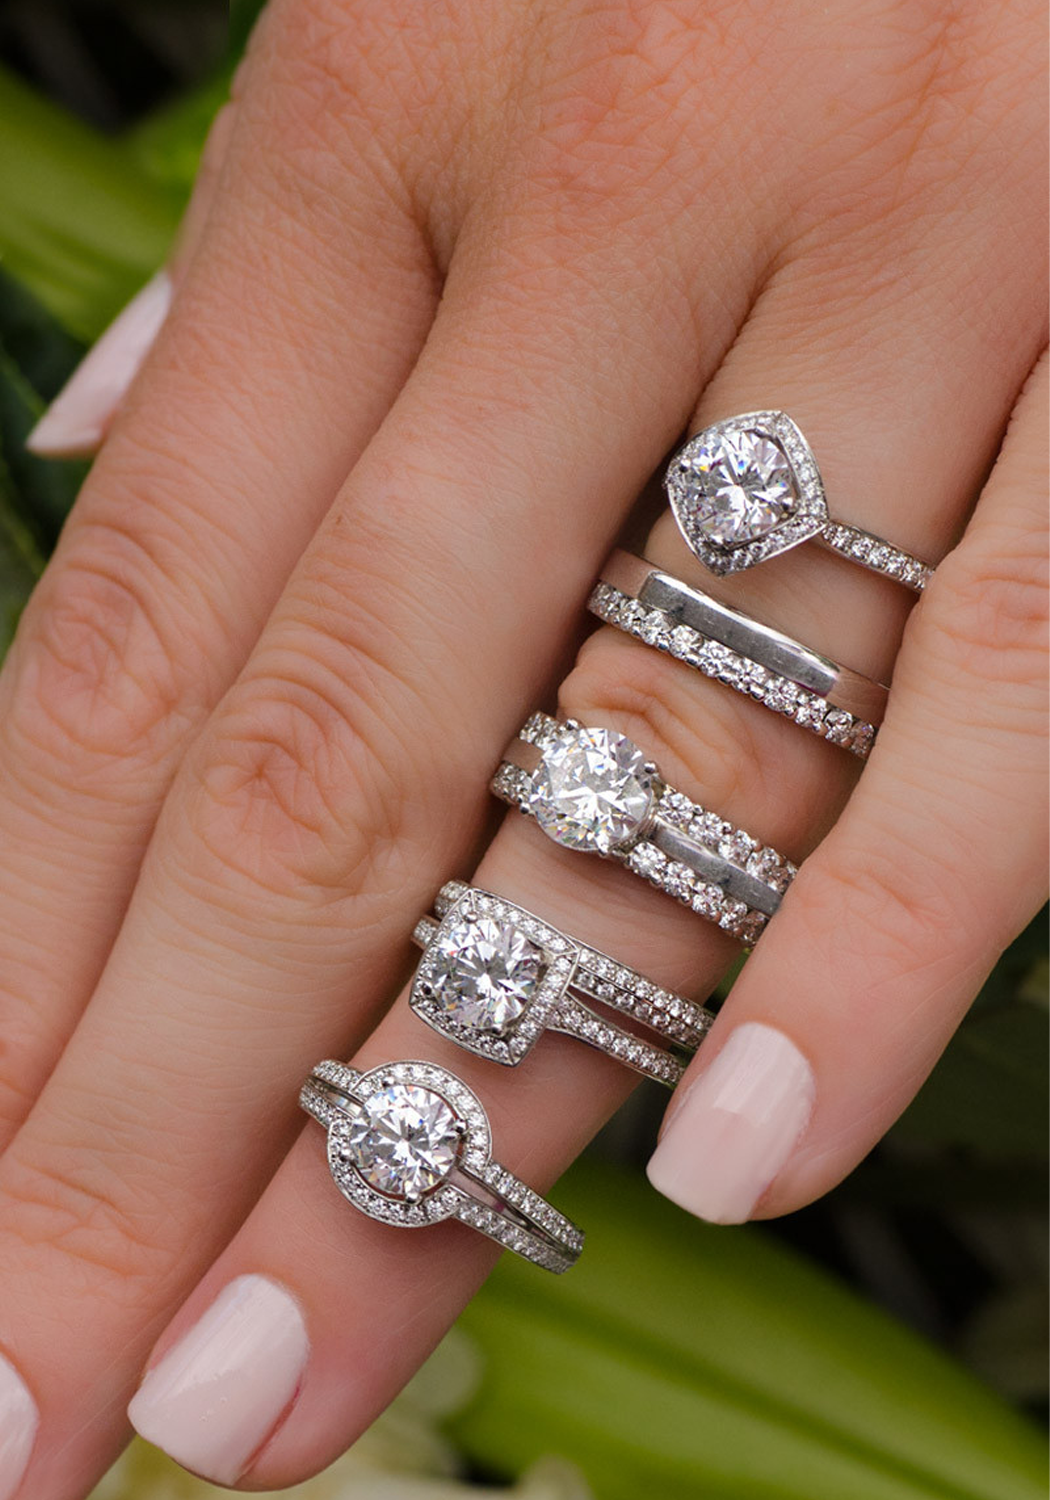 Furrer Jacot Bridal Collection (Sold Separately) | OsterJewelers.com
